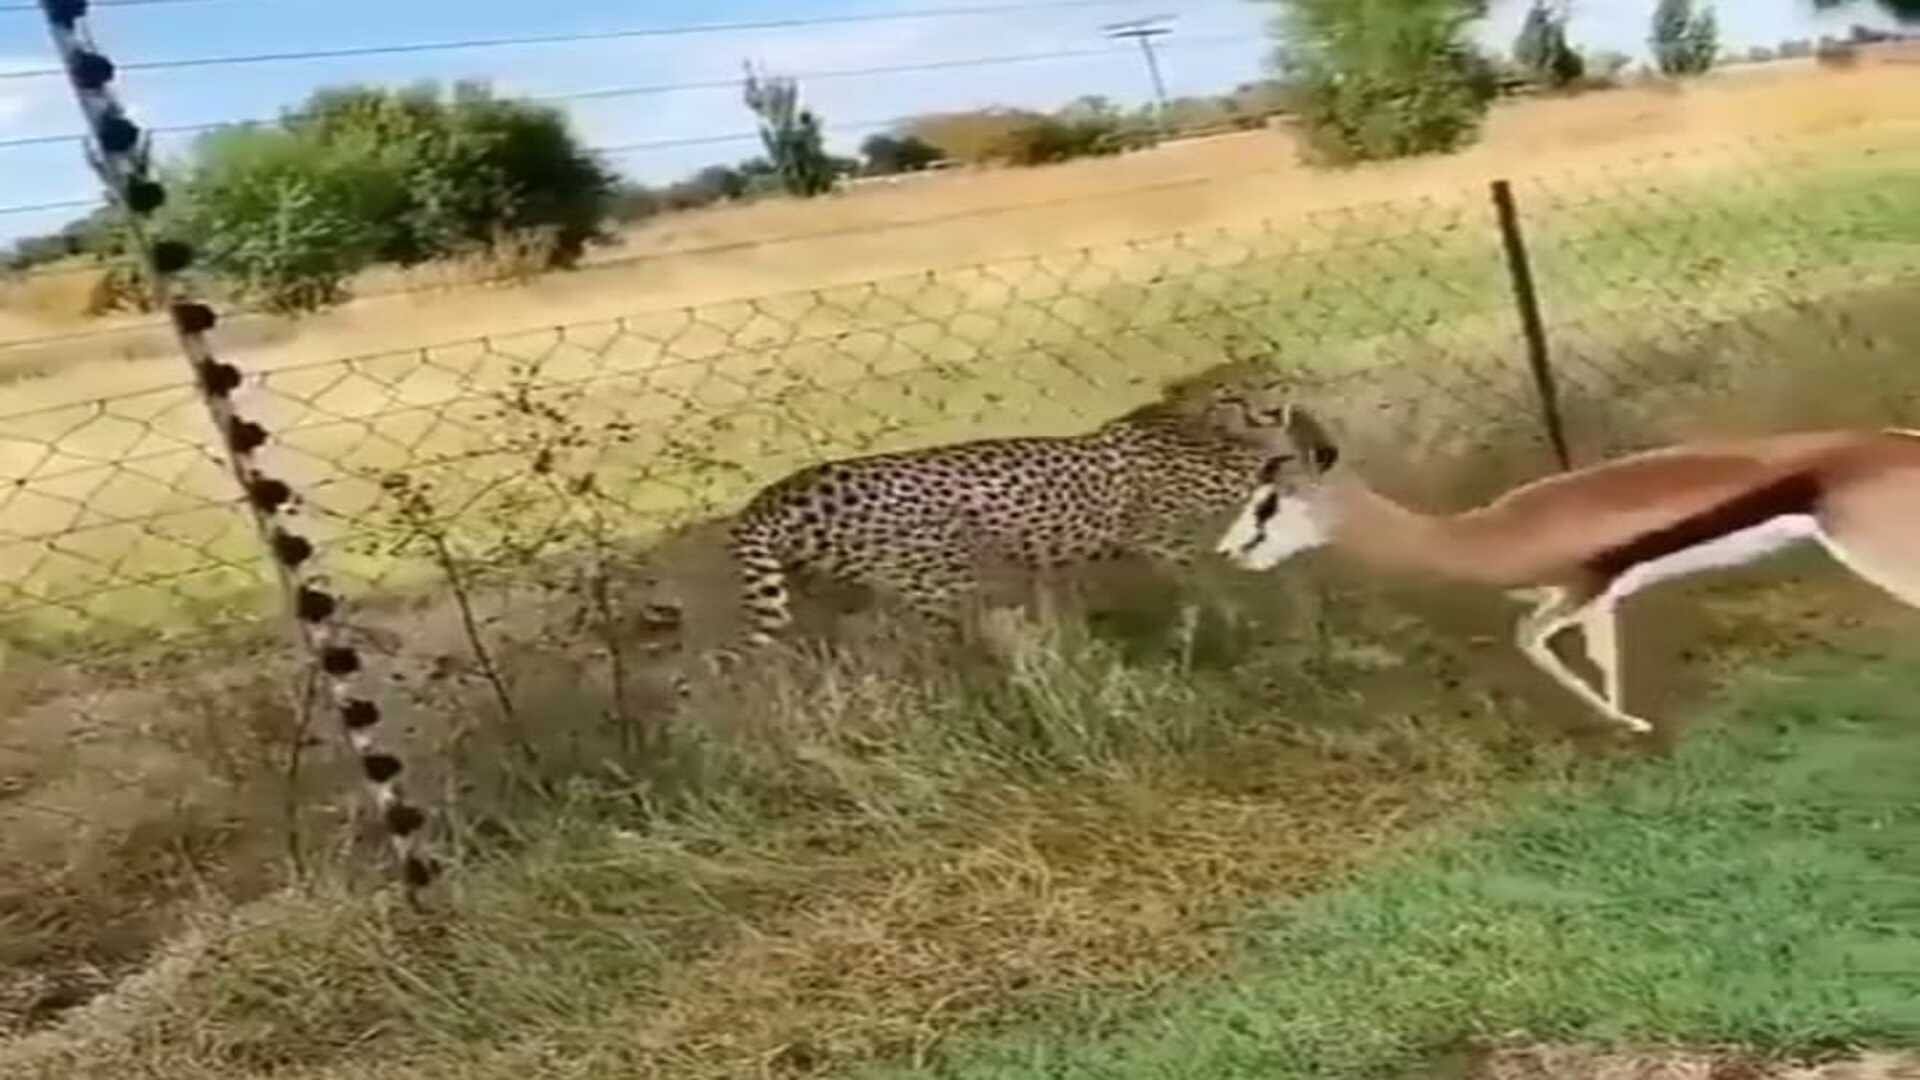 Tiger tried to hunt deer but failed due to fence watch this viral video